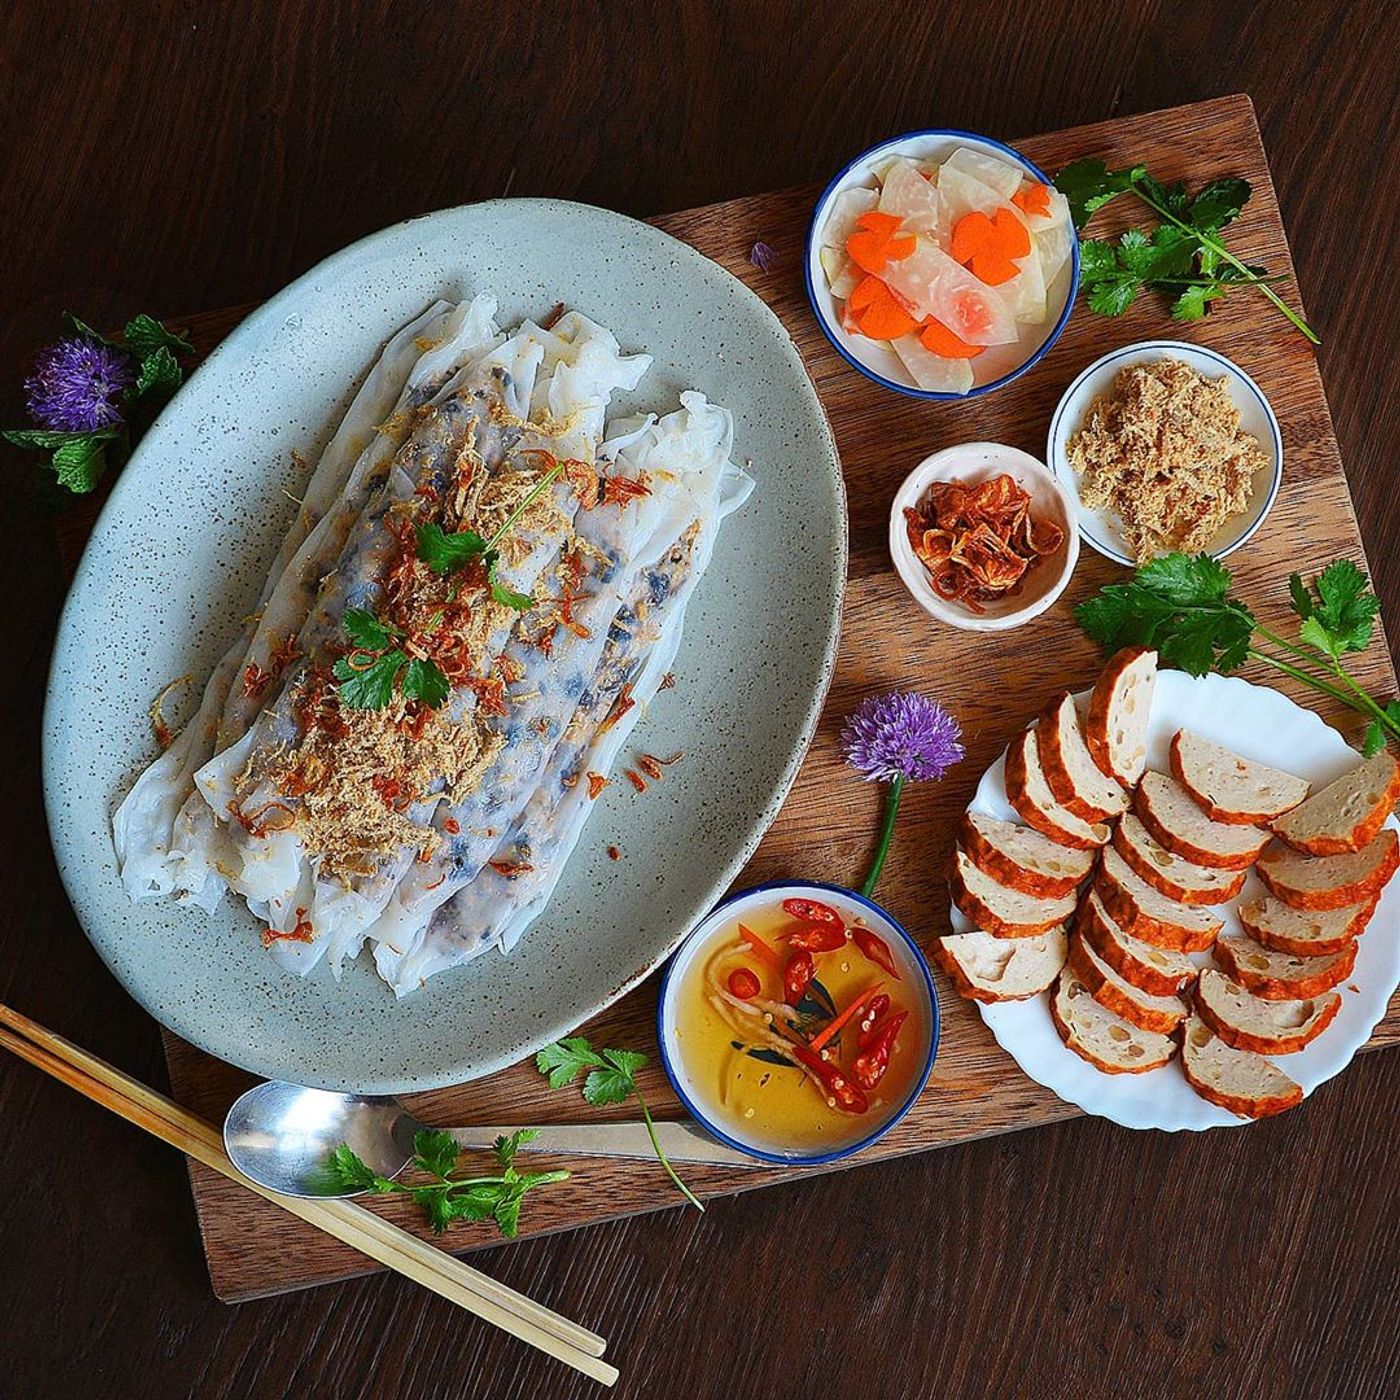 Facts you may not know about Vietnamese cuisine